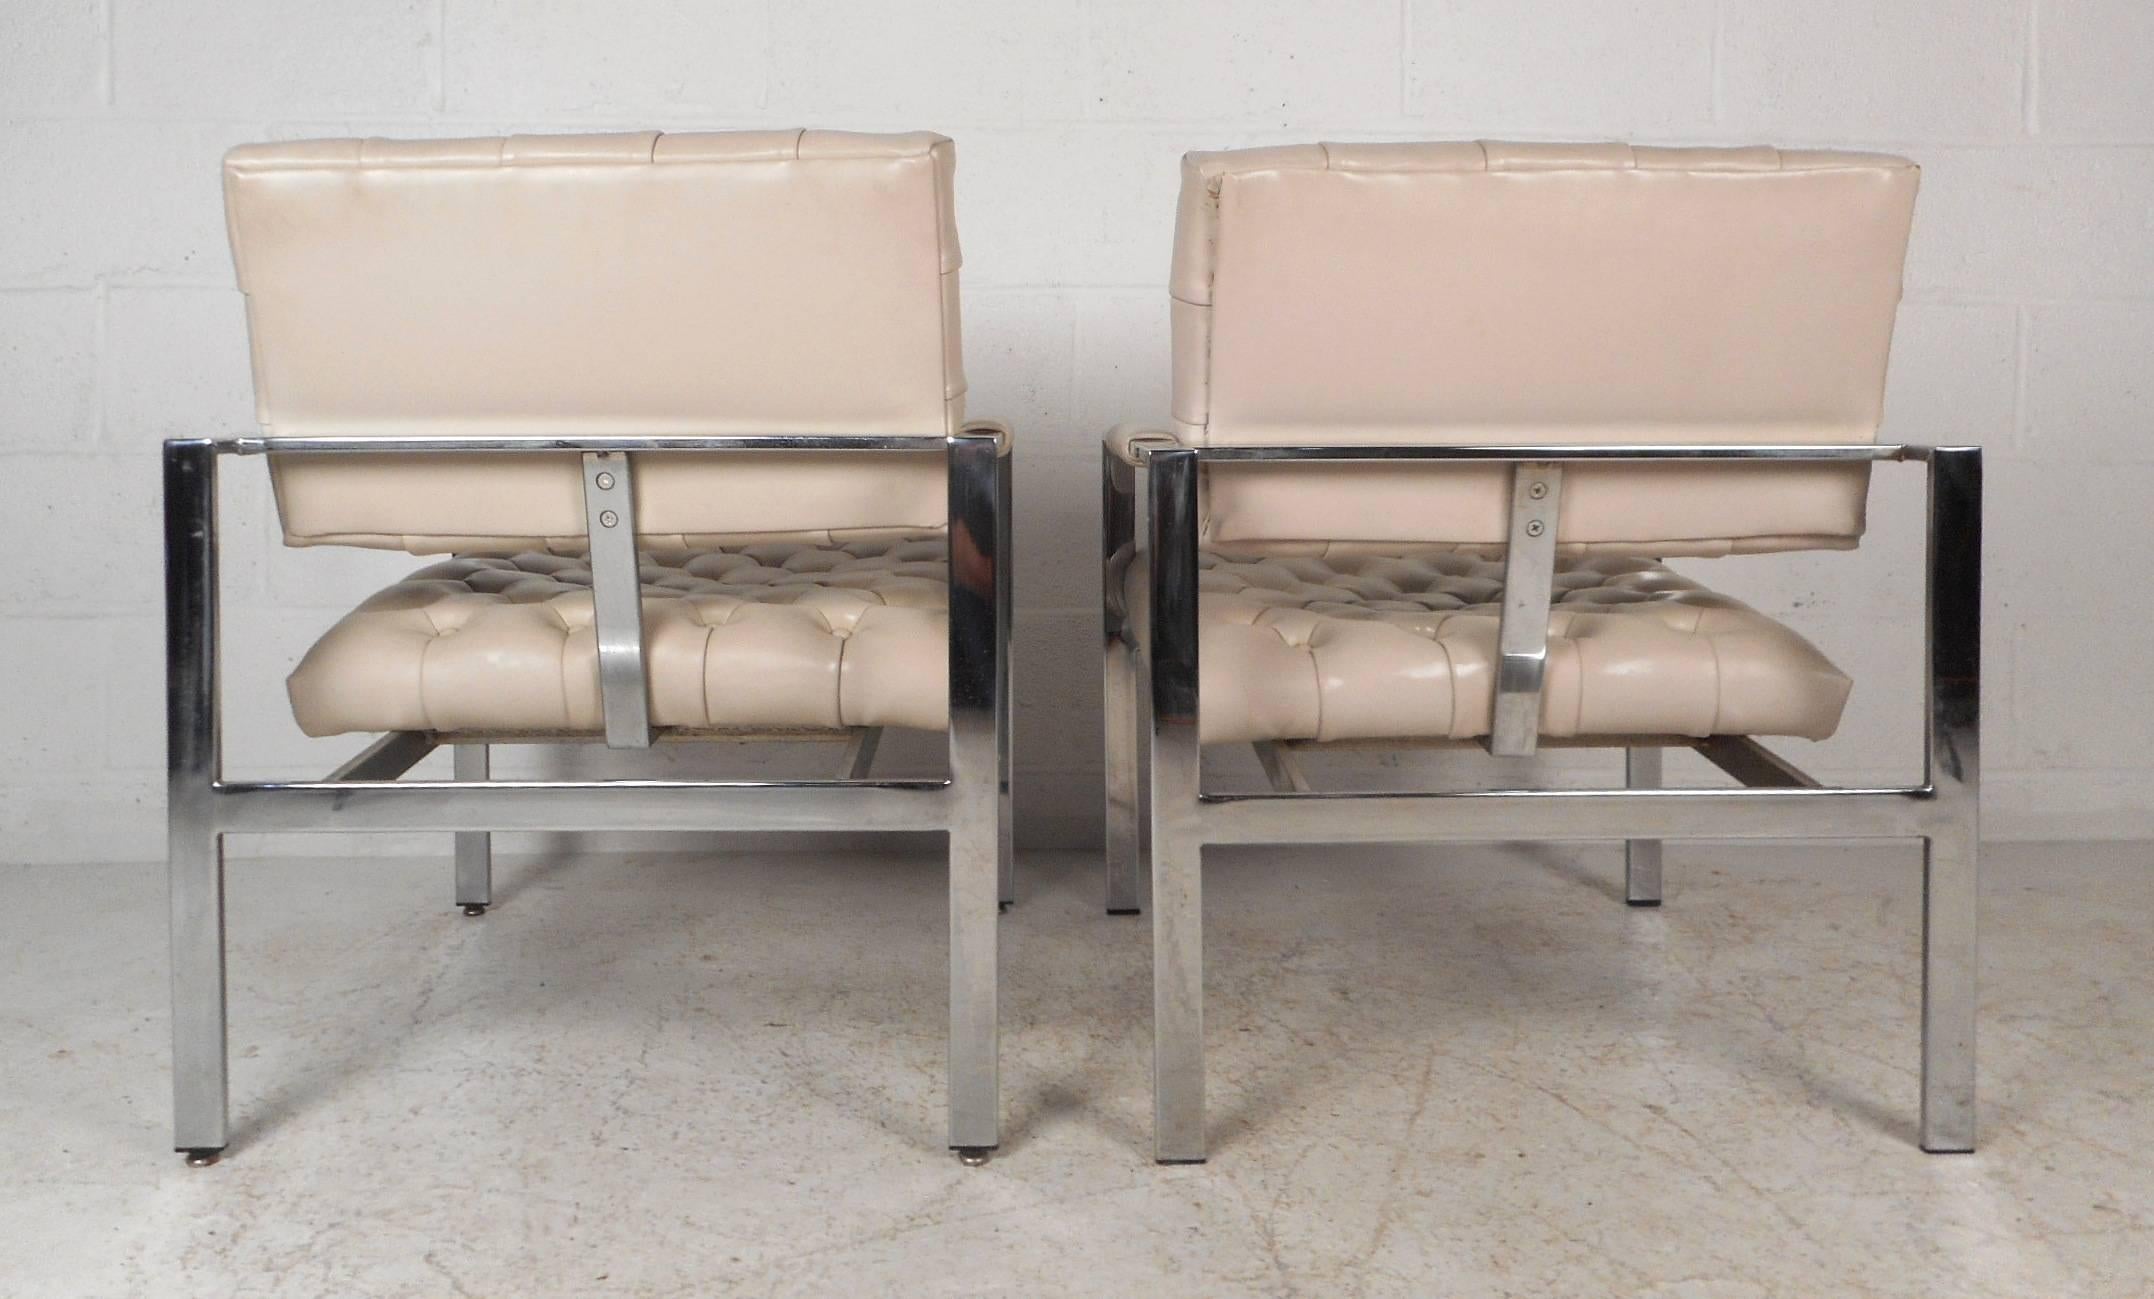 Late 20th Century Mid-Century Modern Vinyl Tufted Lounge Chairs by Milo Baughman for Thayer Coggin